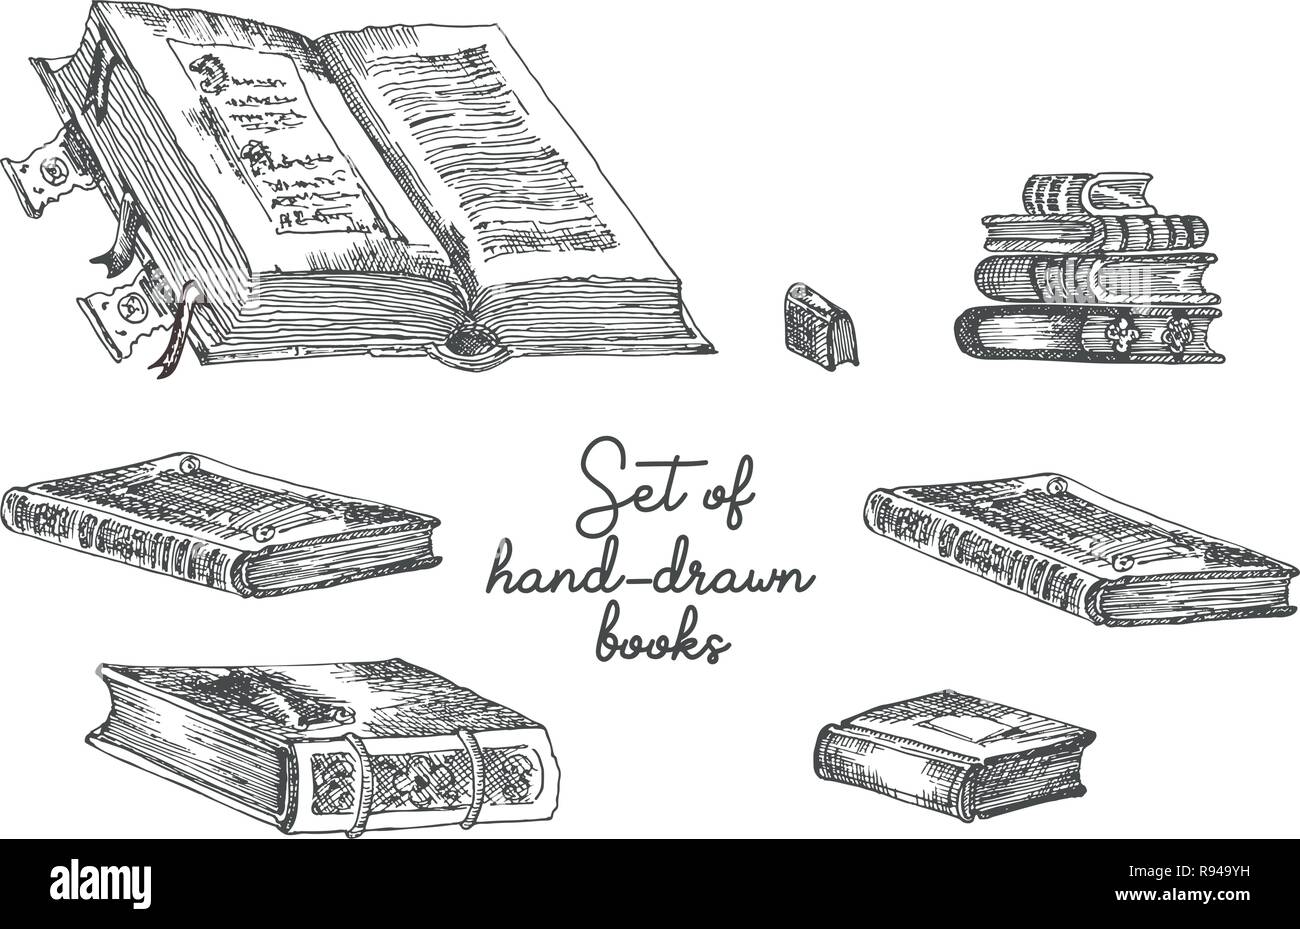 https://c8.alamy.com/comp/R949YH/set-of-hand-drawing-sketch-books-for-concept-vintage-design-fair-or-festival-flyer-paper-banner-school-library-retro-poster-bookshop-advertising-in-engraving-style-R949YH.jpg